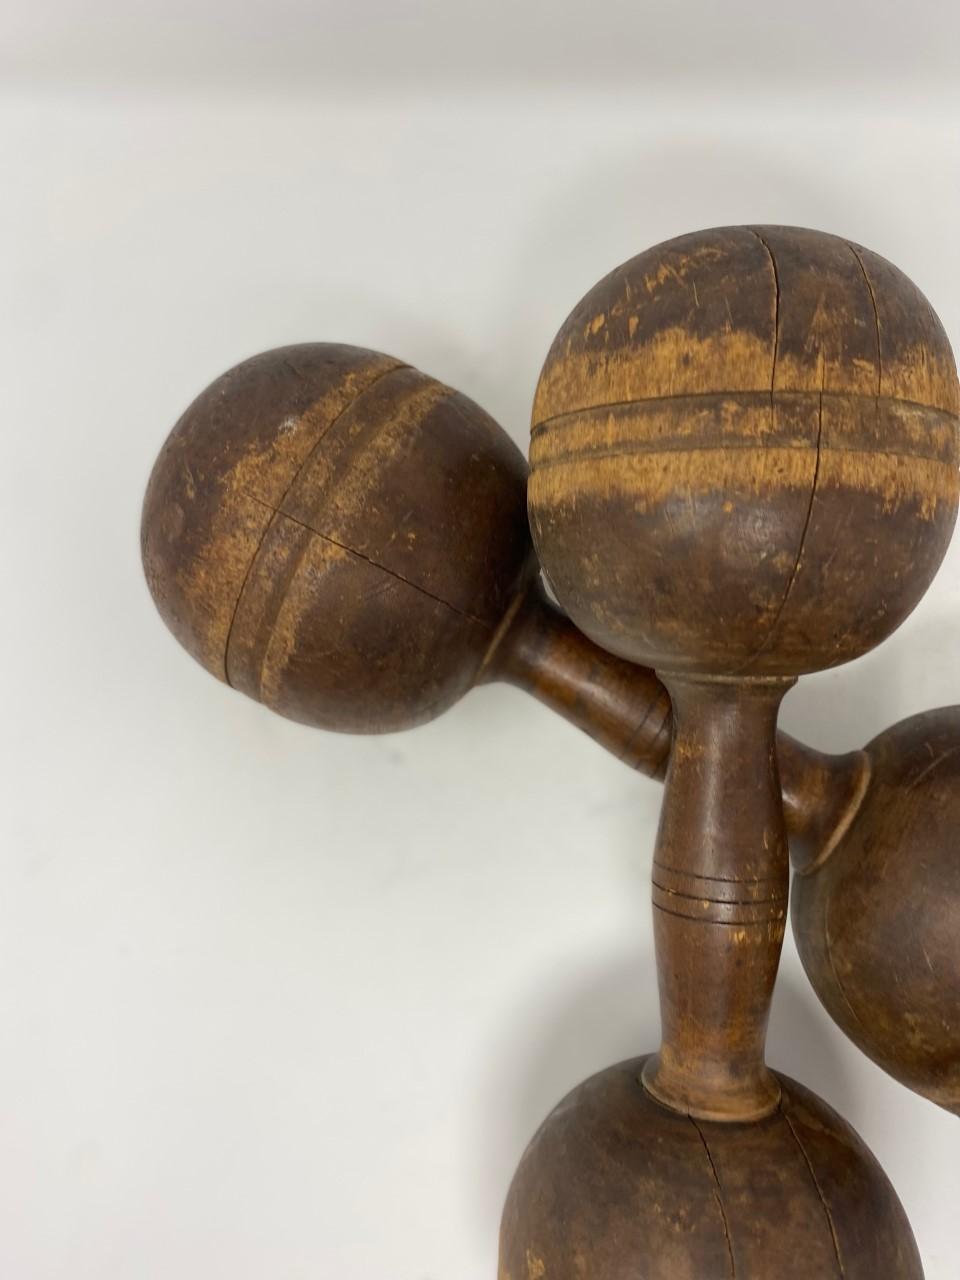 Hand-Crafted Antique 1900s Pair of Wooden Hand Weights